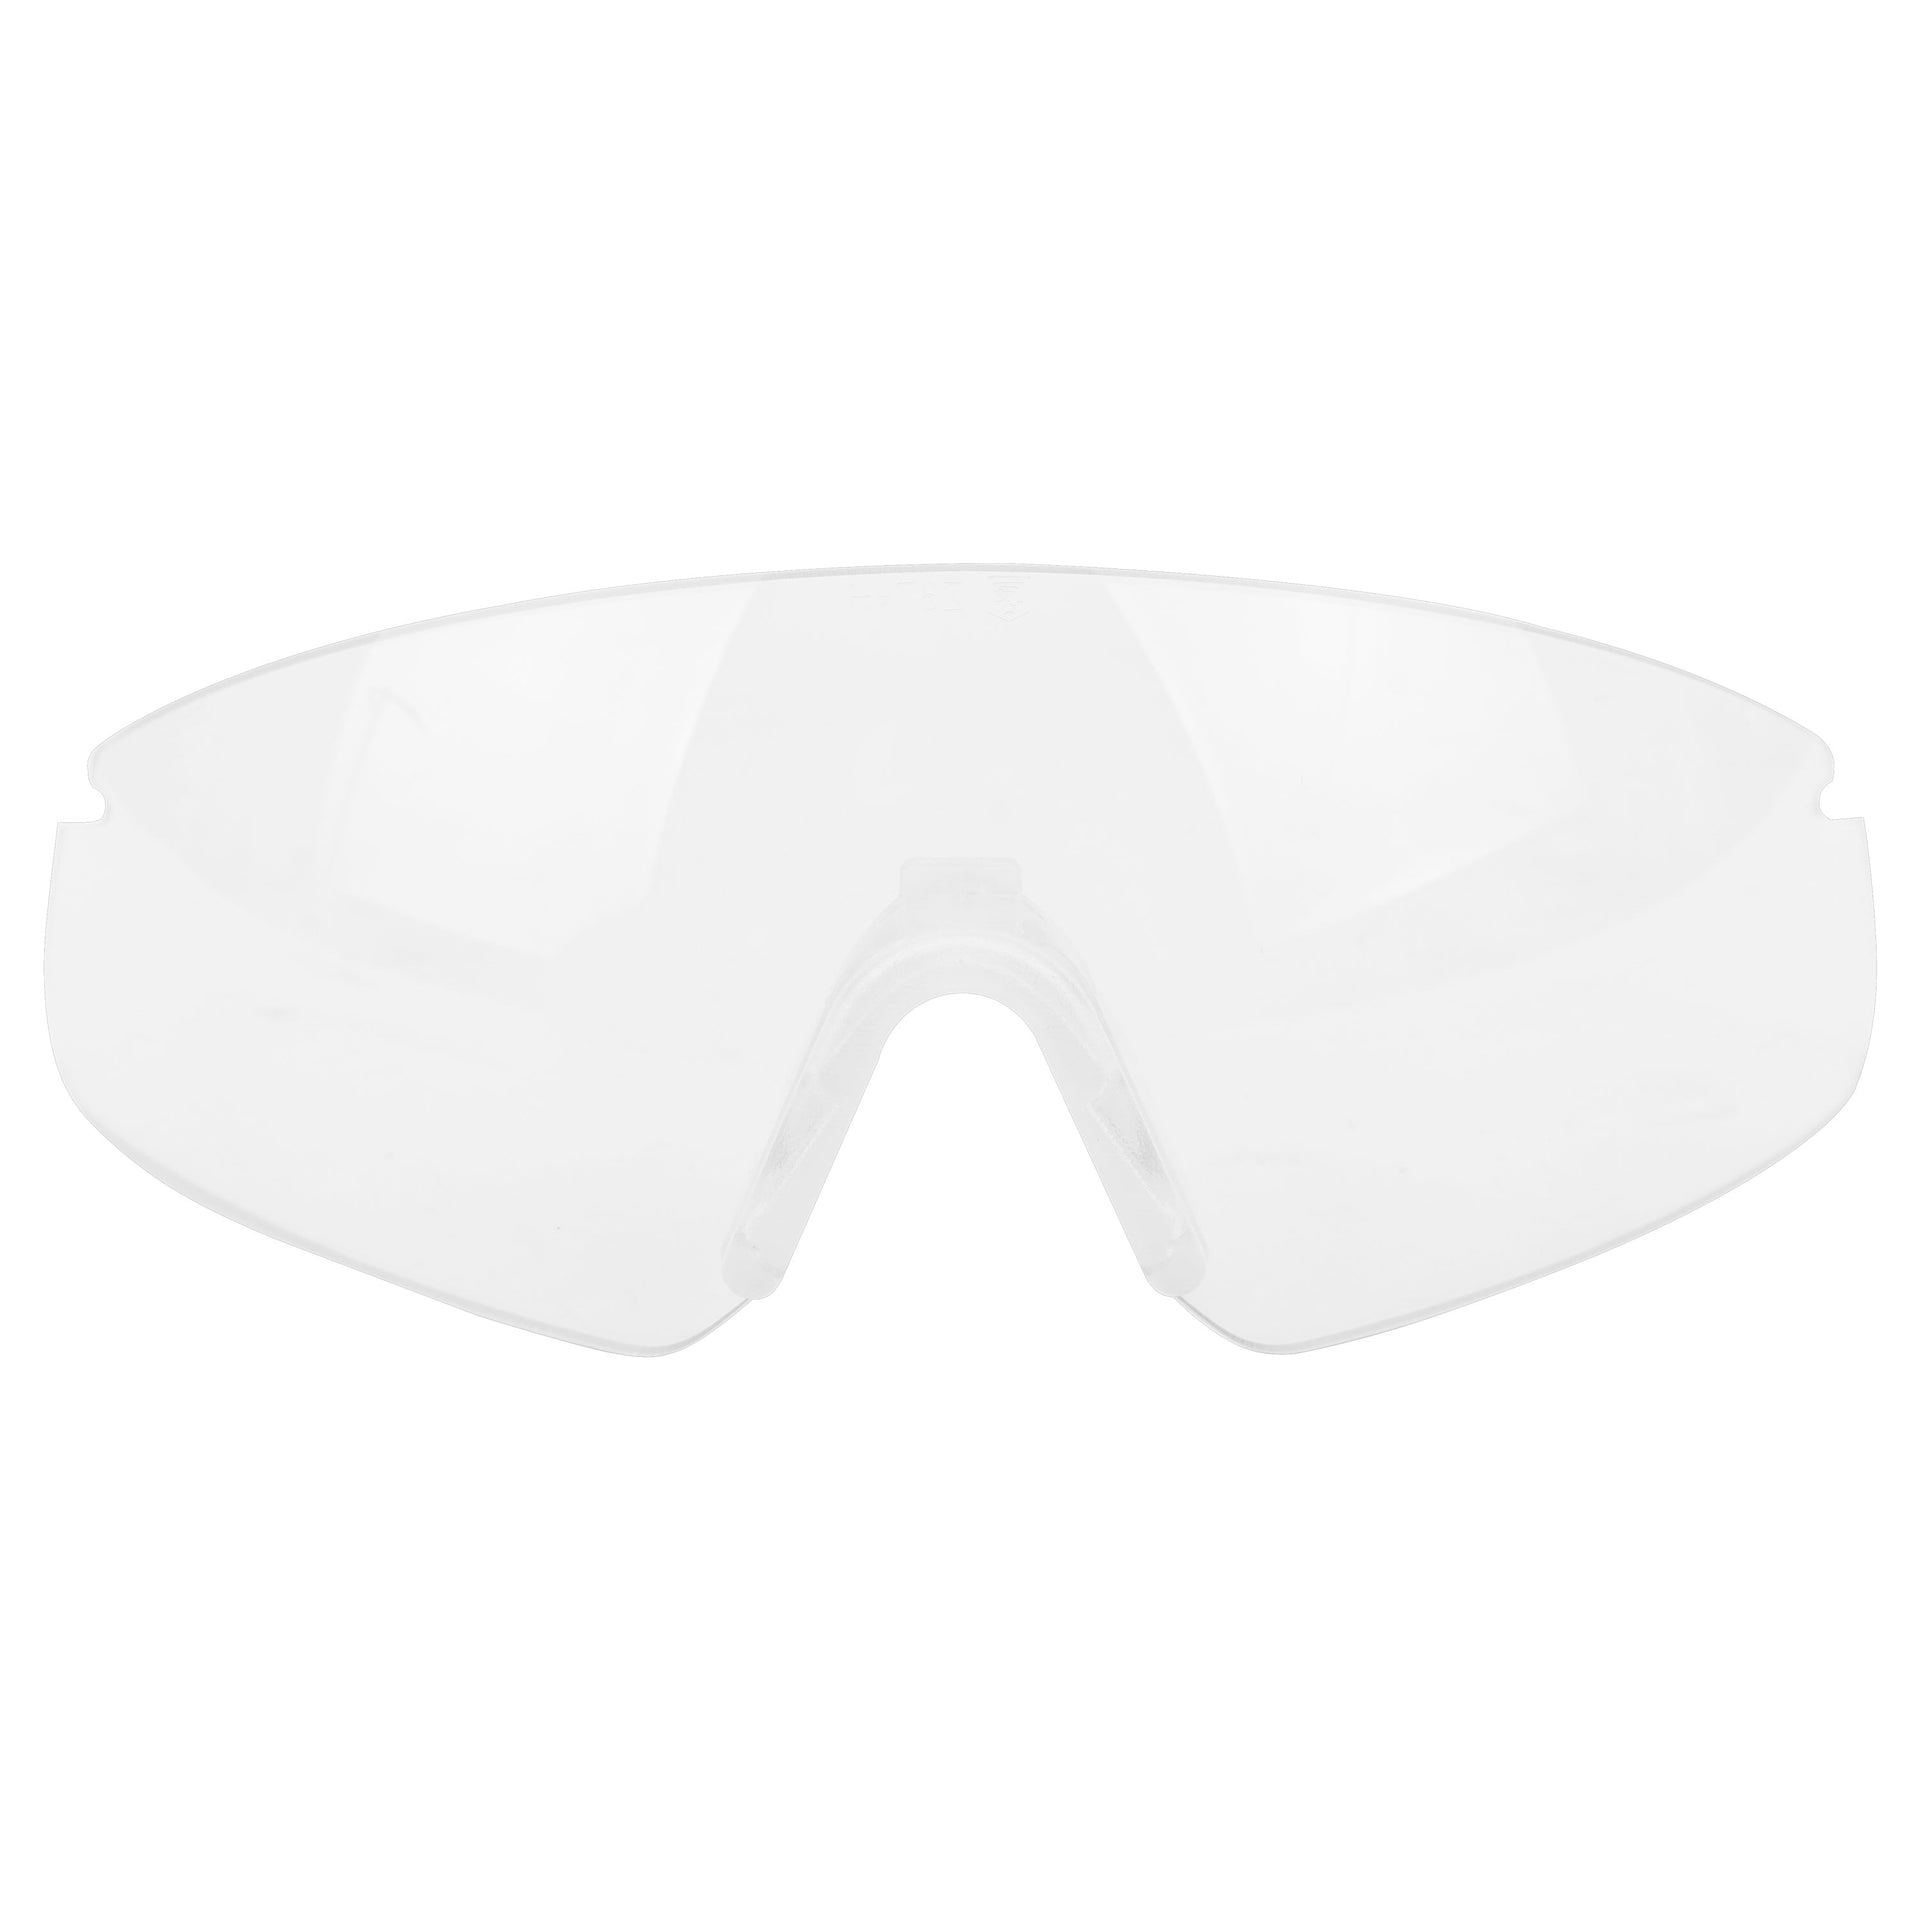 Lens Sawfly Clear Nose Piece clear